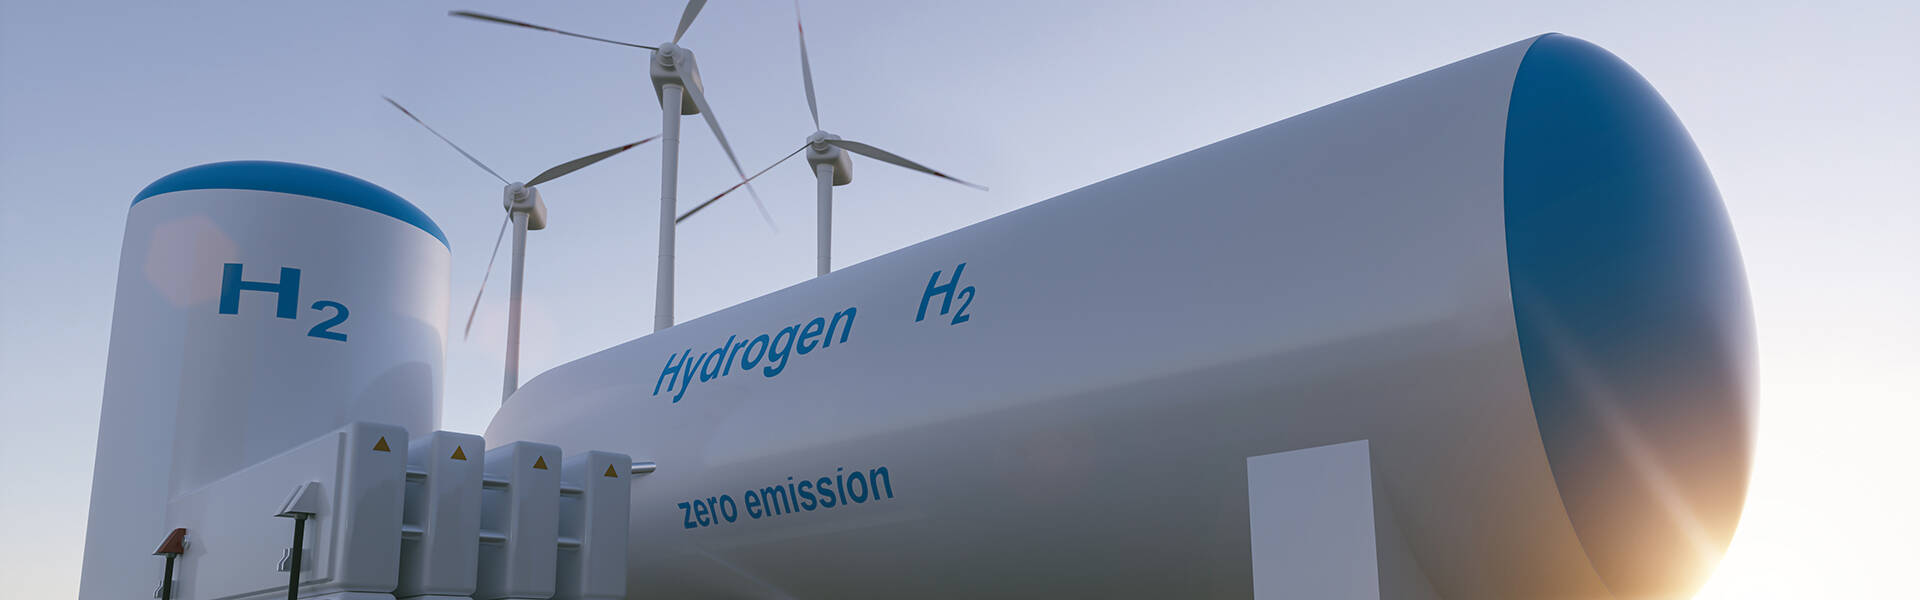 World places ‘big bet on hydrogen’ at COP26